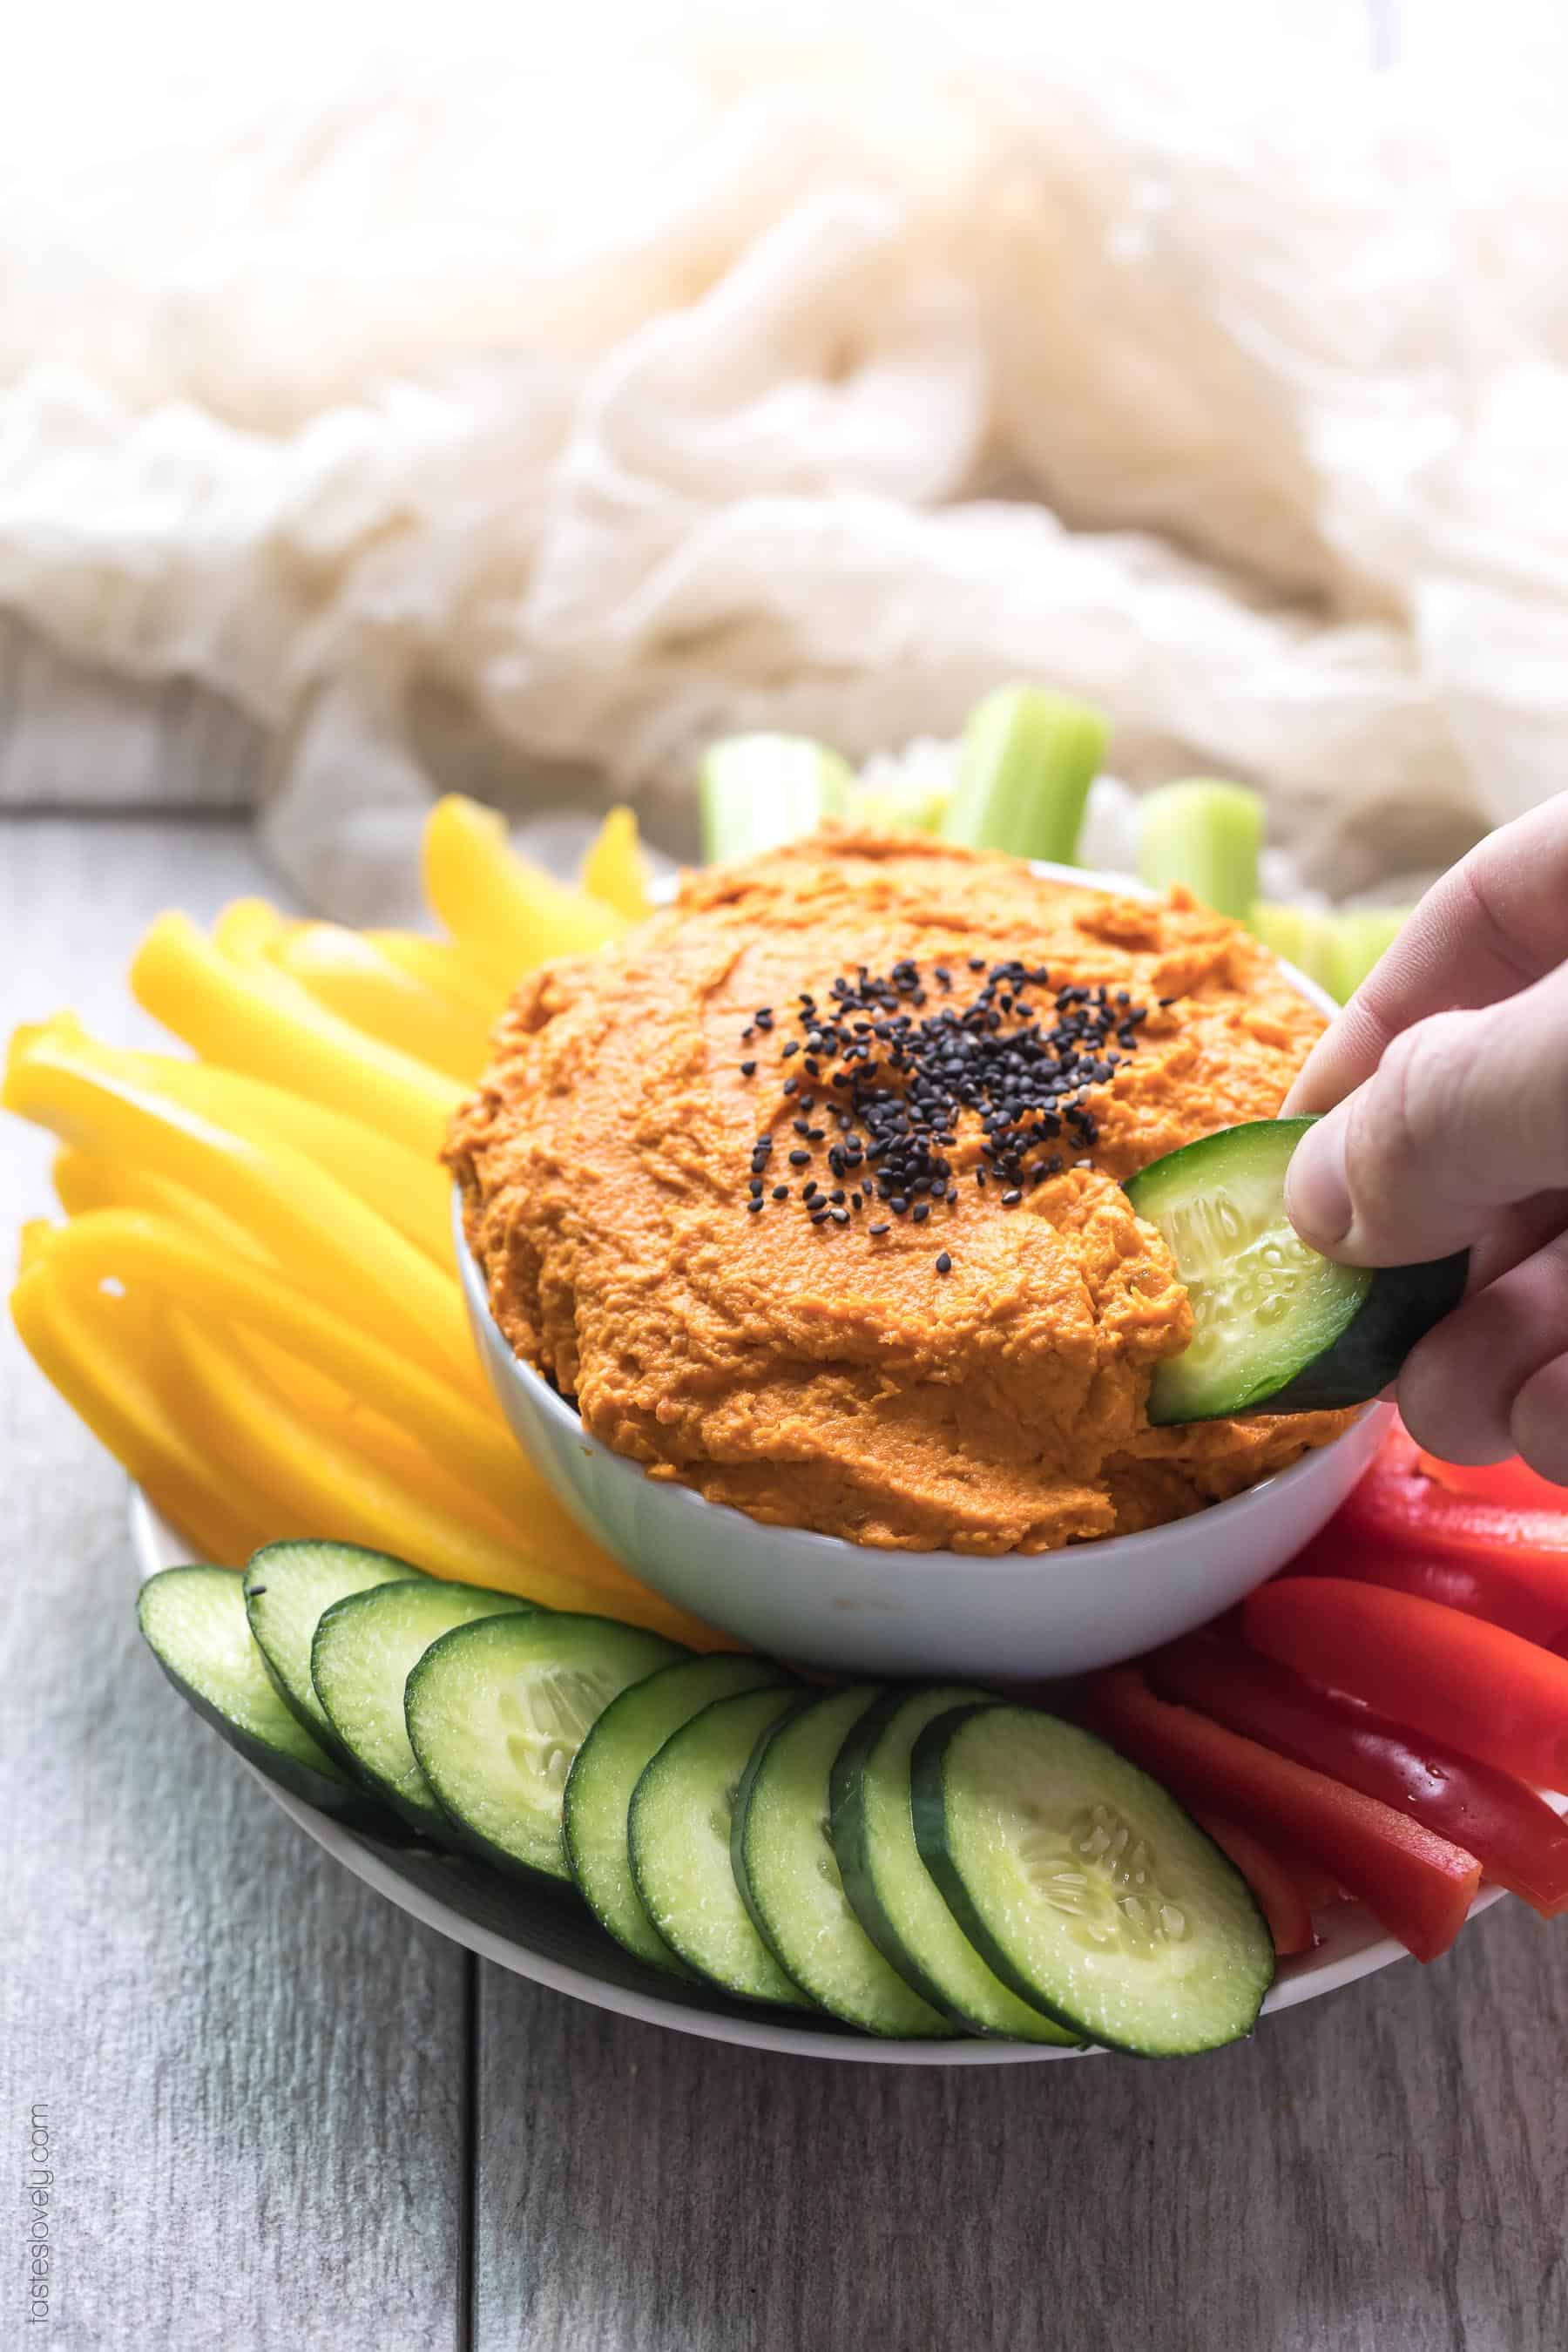 Paleo & Whole30 Roasted Carrot Dip - a delicious and healthy appetizer everyone loves! Gluten free, grain free, dairy free, sugar free, low carb, vegan, clean eating.